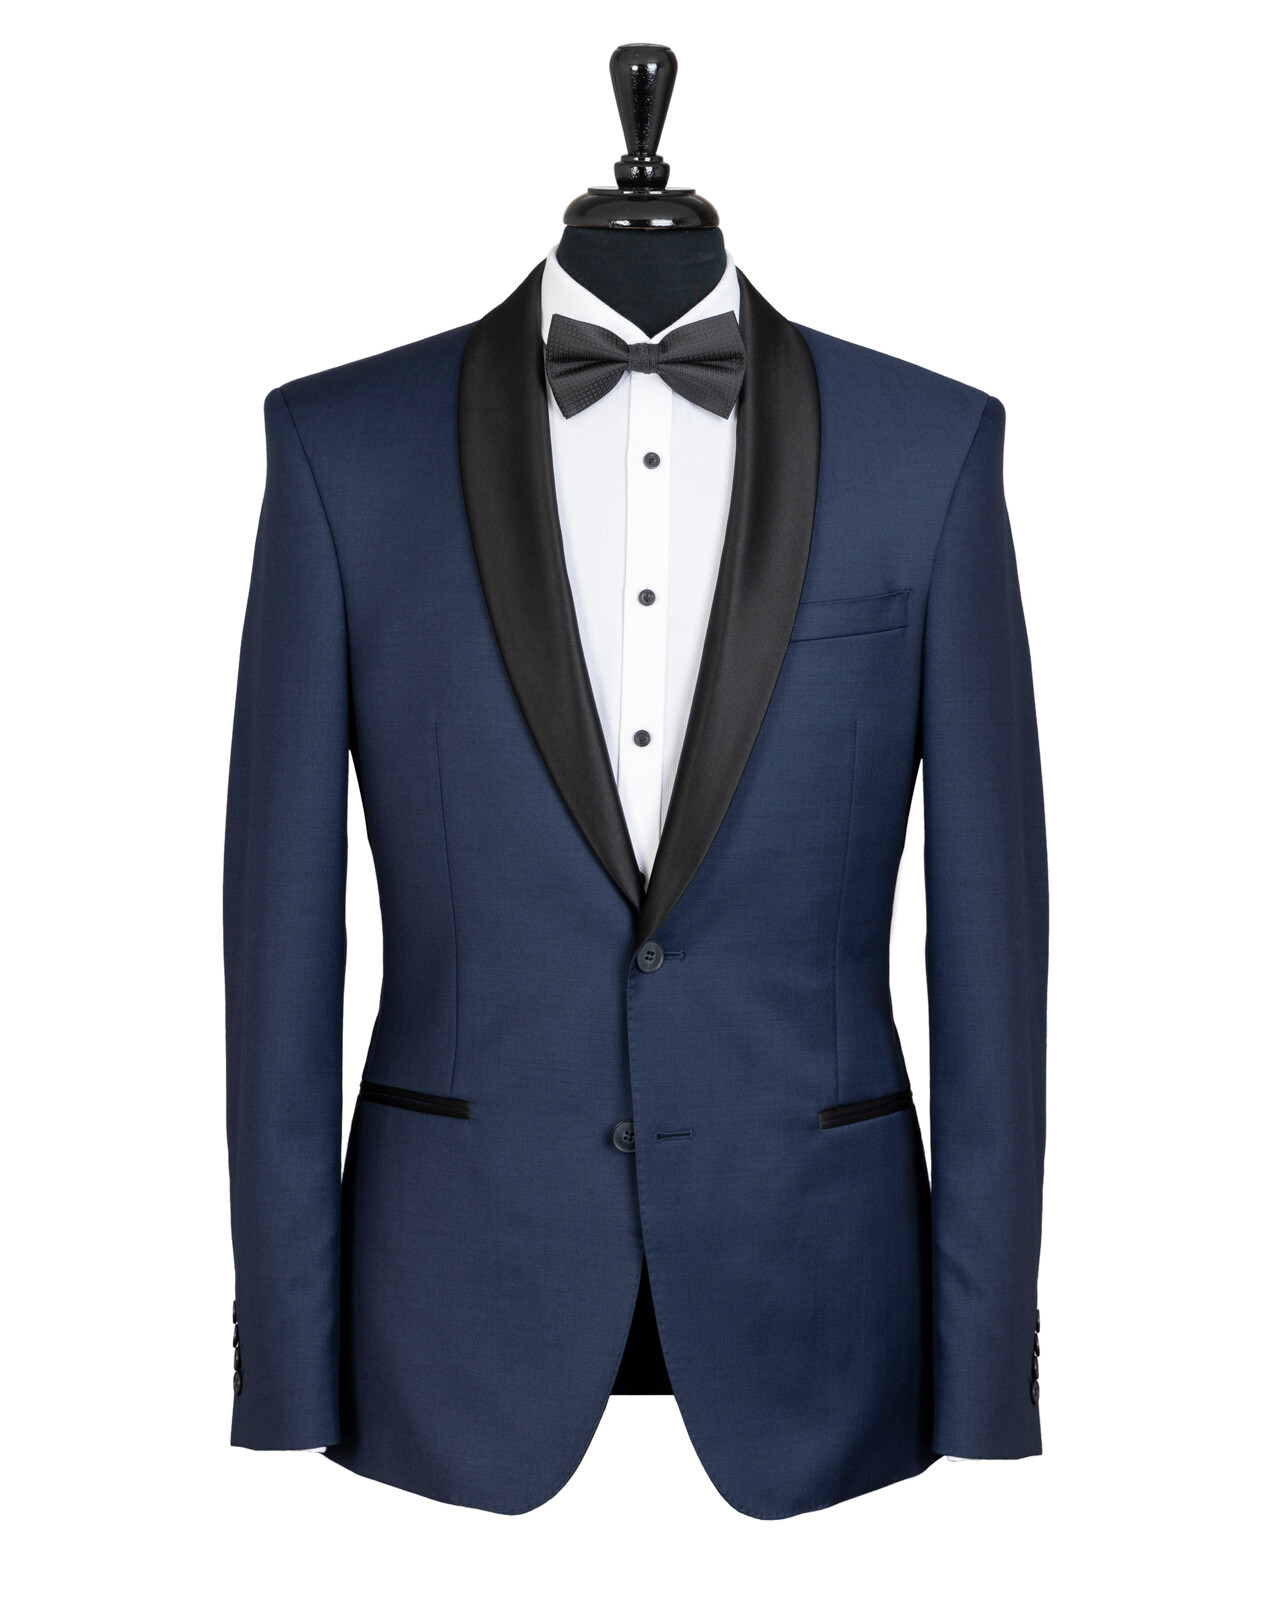 Gibson Spectre Navy Shawl Lapel Tuxedo - Hire or Buy - Black Jacket Suiting